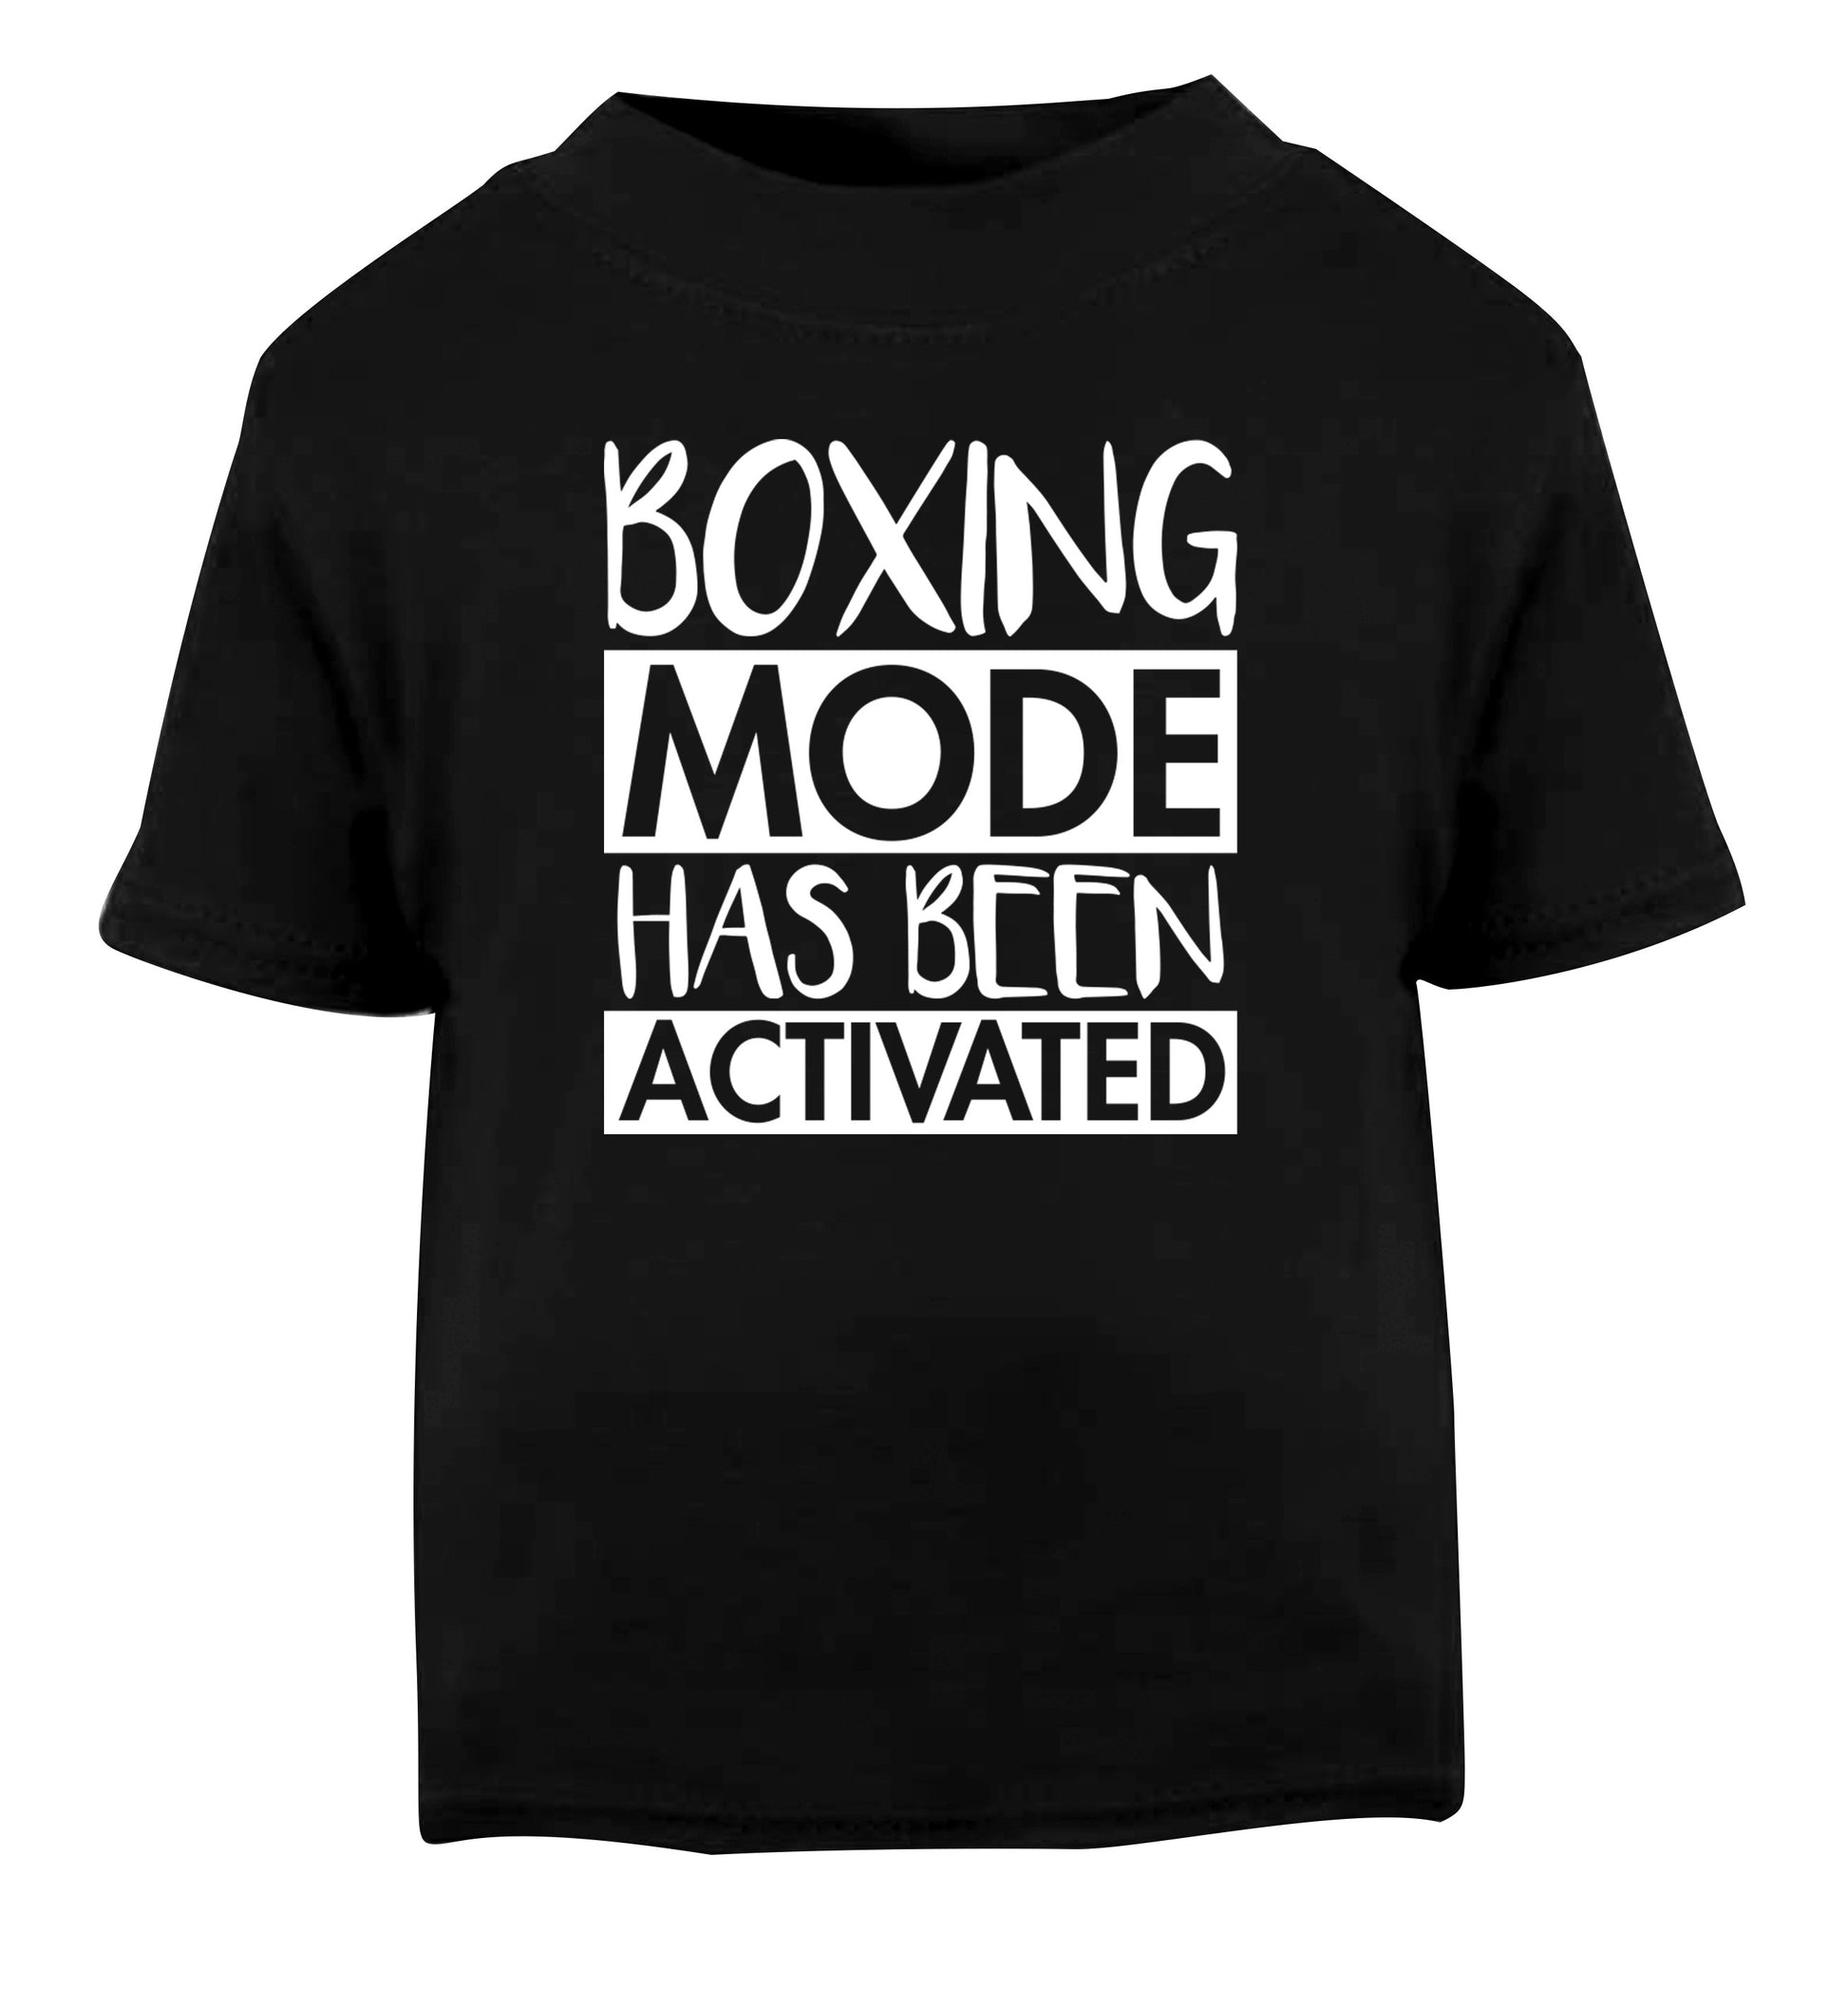 Boxing mode activated Black Baby Toddler Tshirt 2 years